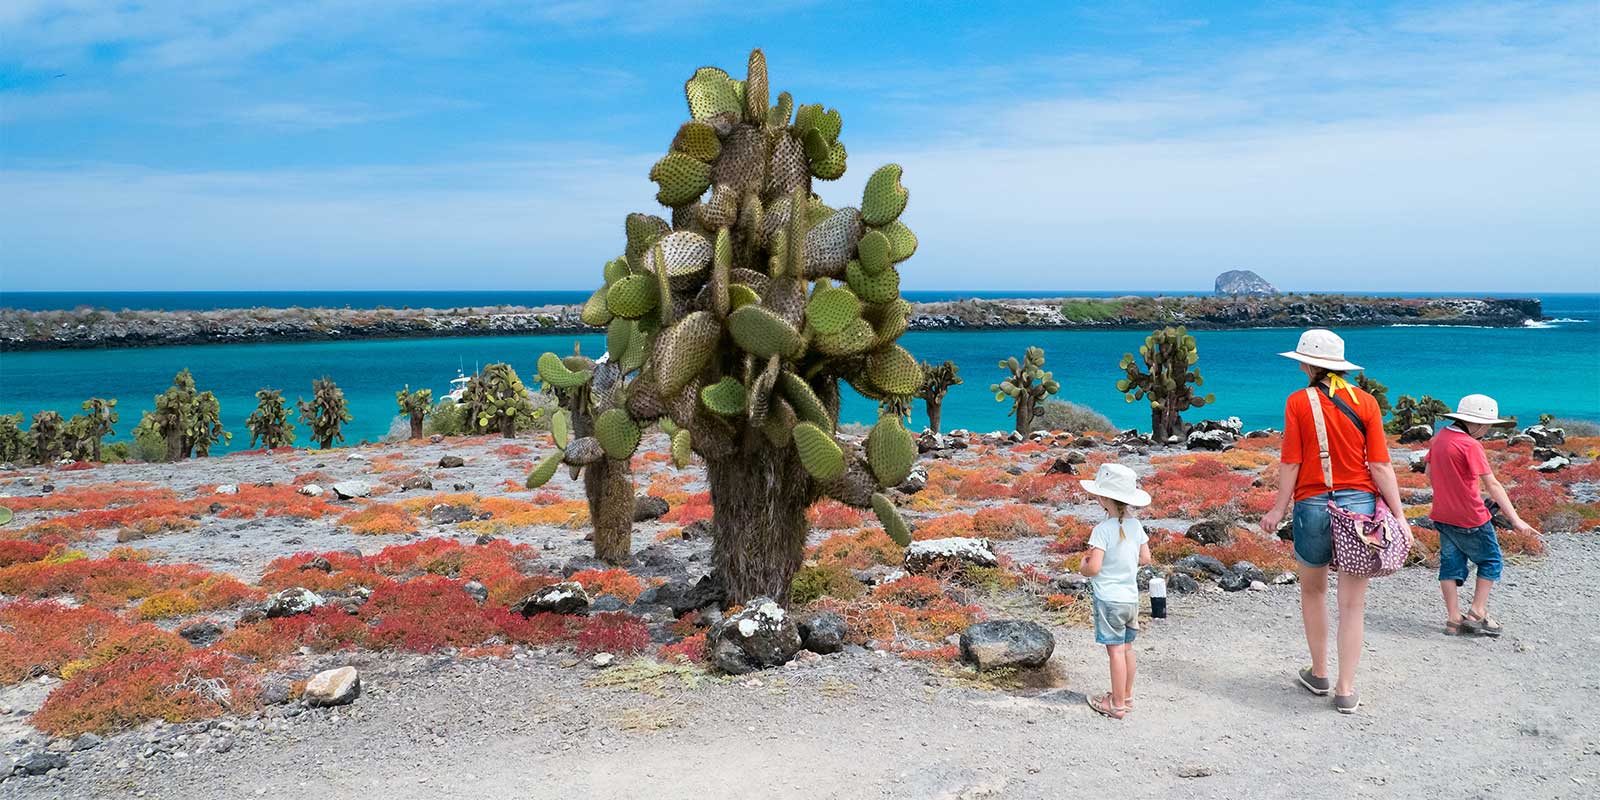 Family on holiday in the Galapagos Islands